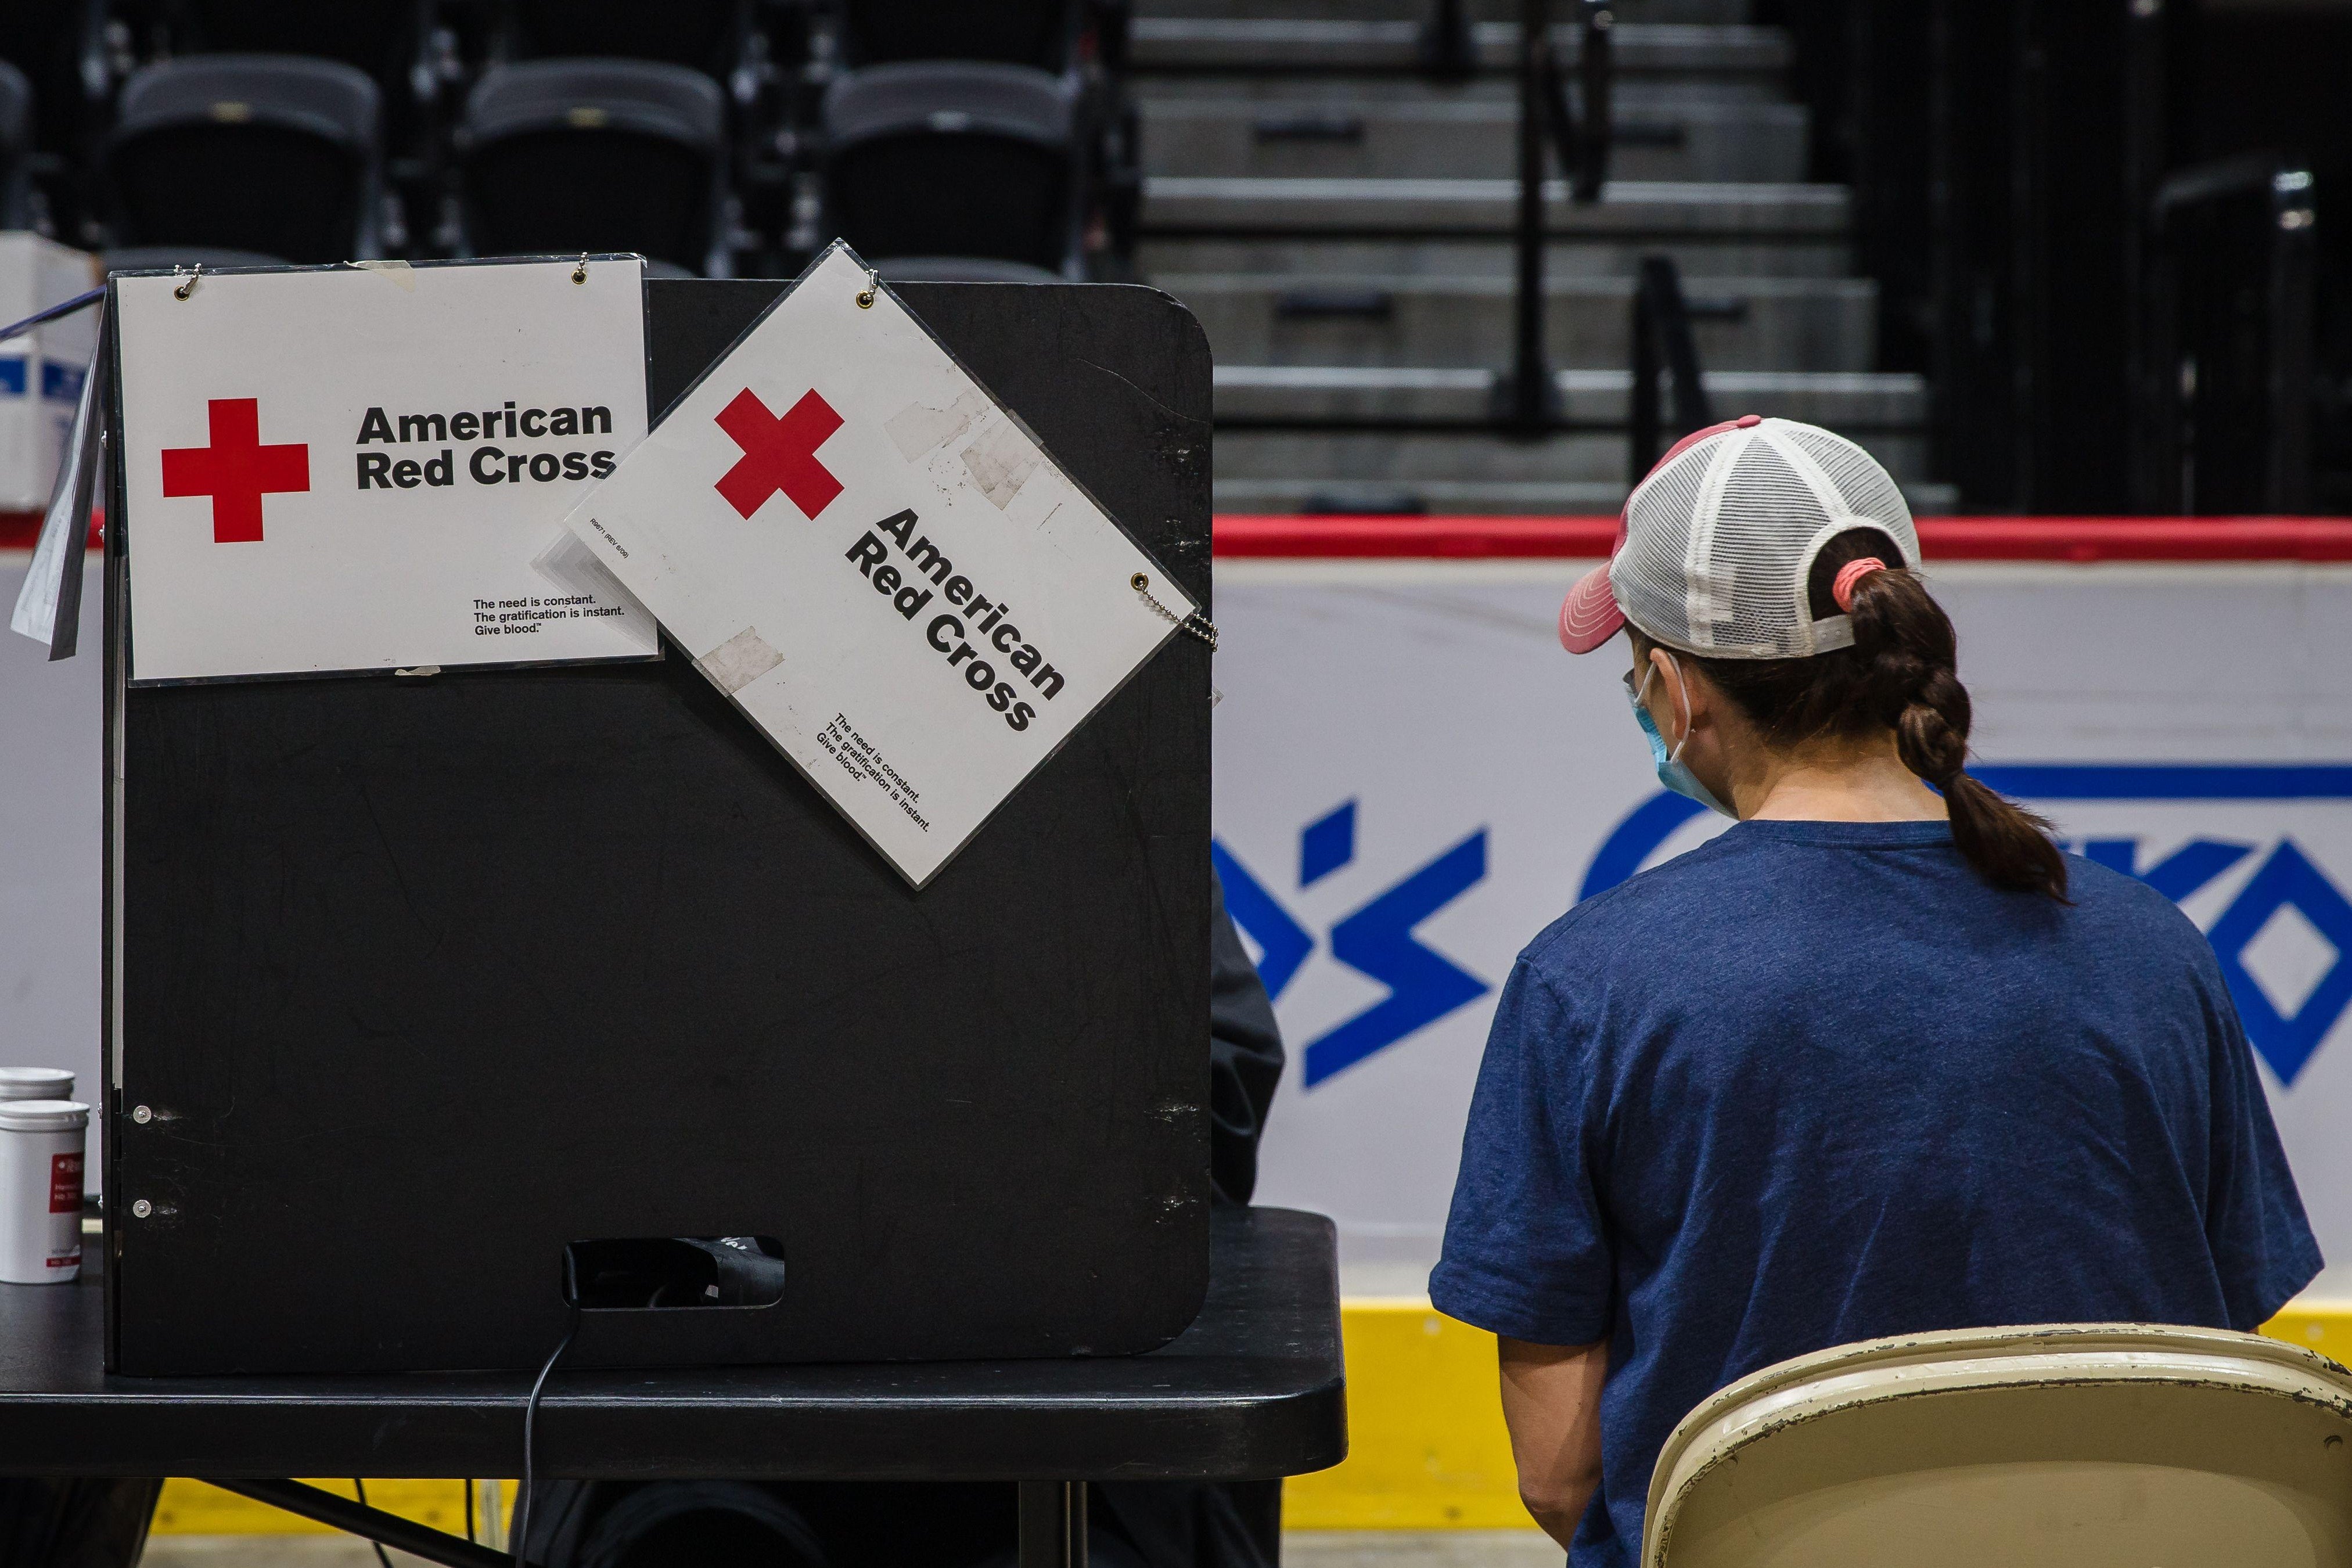 A woman interviews who is about to donate blood sits next to a privacy divider that has the American Red Cross logo on it